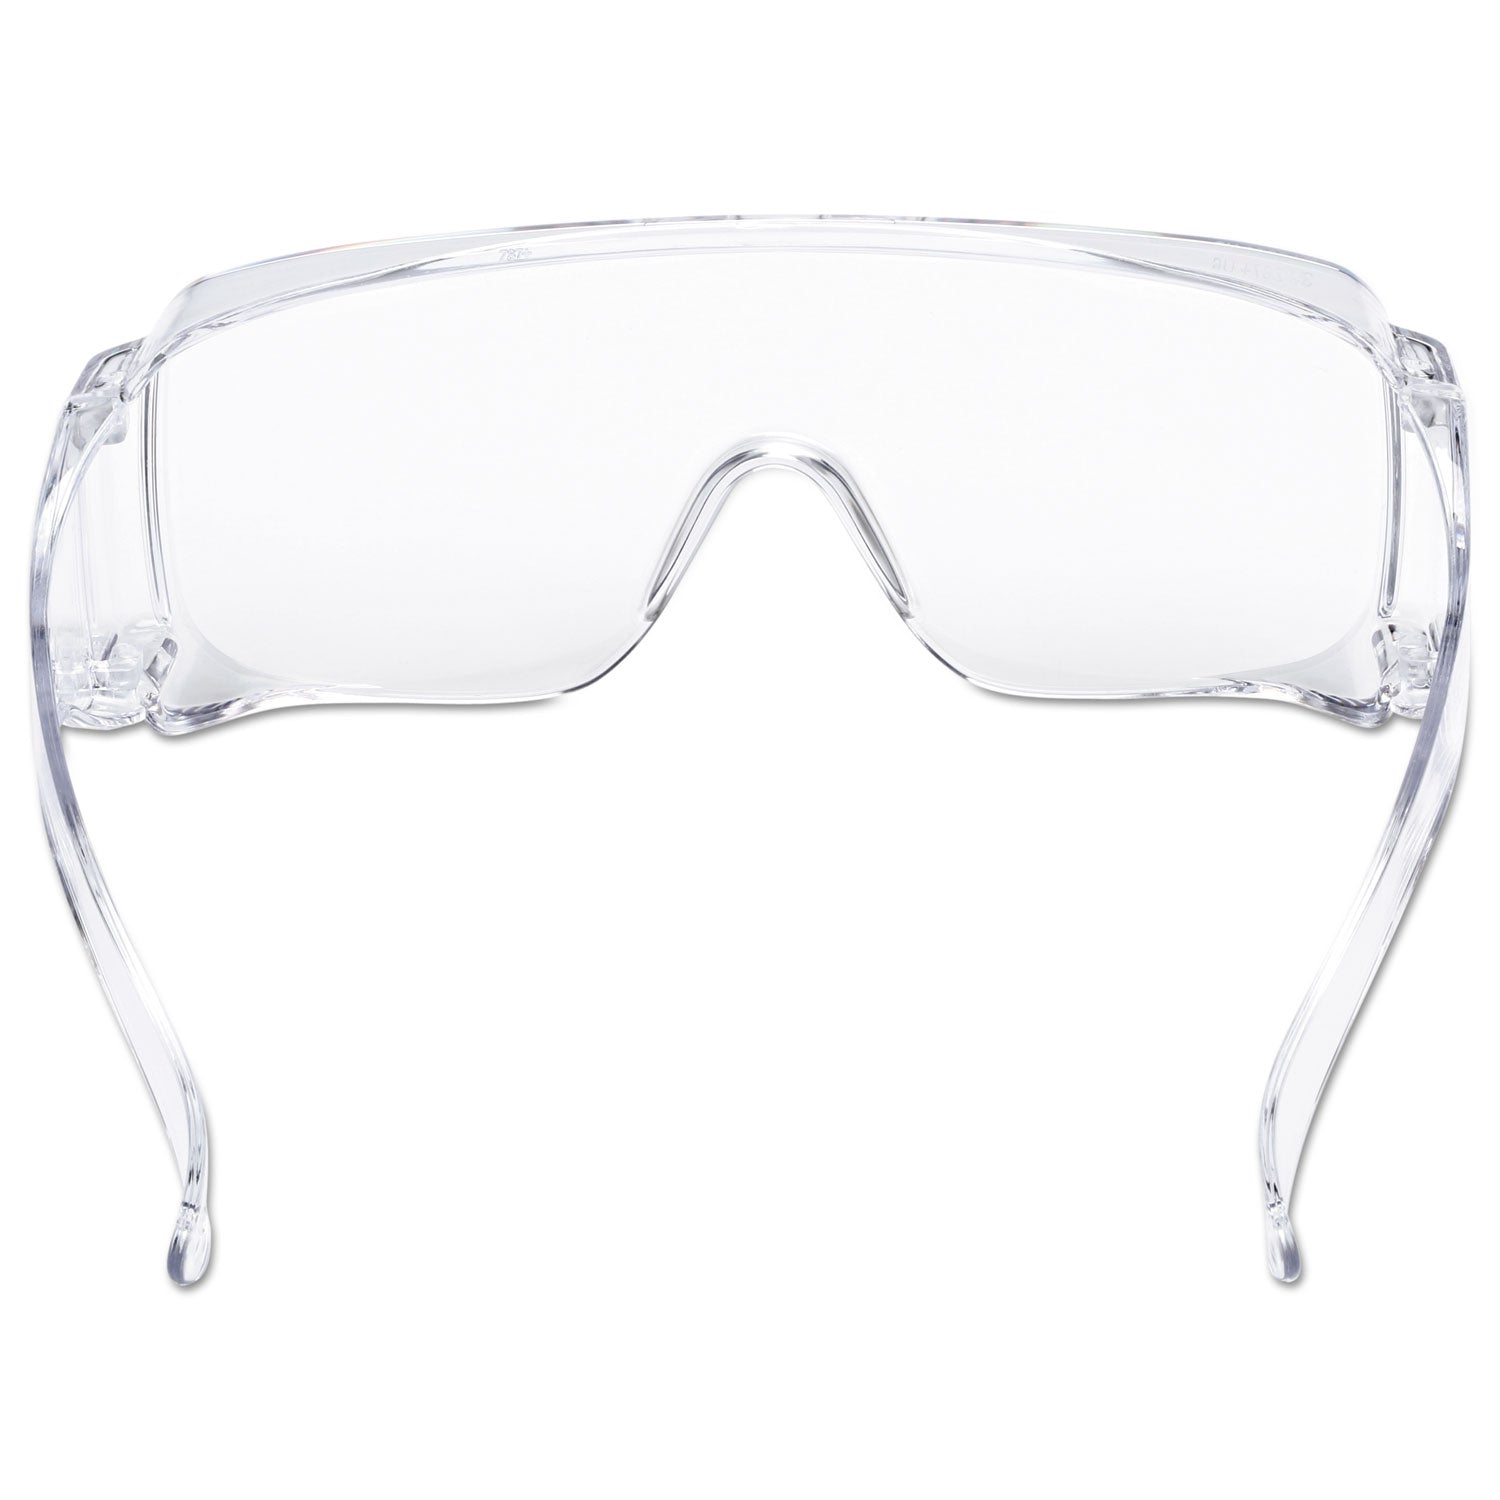 tour-guard-v-safety-glasses-one-size-fits-most-clear-frame-lens-20-box_mmmtgv0120 - 3